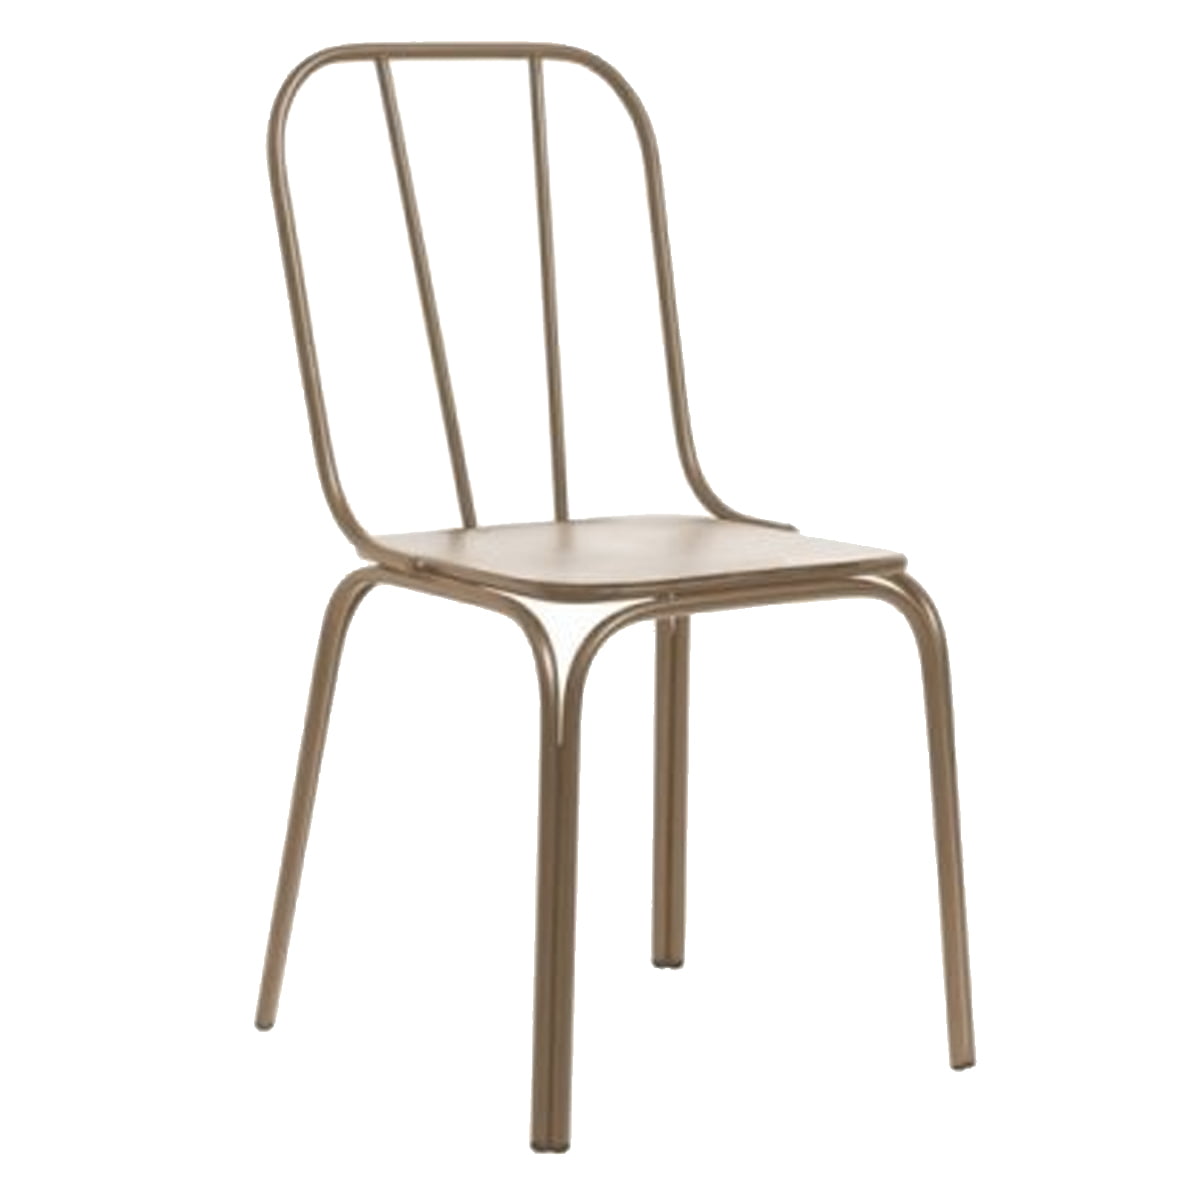 Iron Outdoor Dining Chair Hotel Cafe Restaurant Shopping Mall